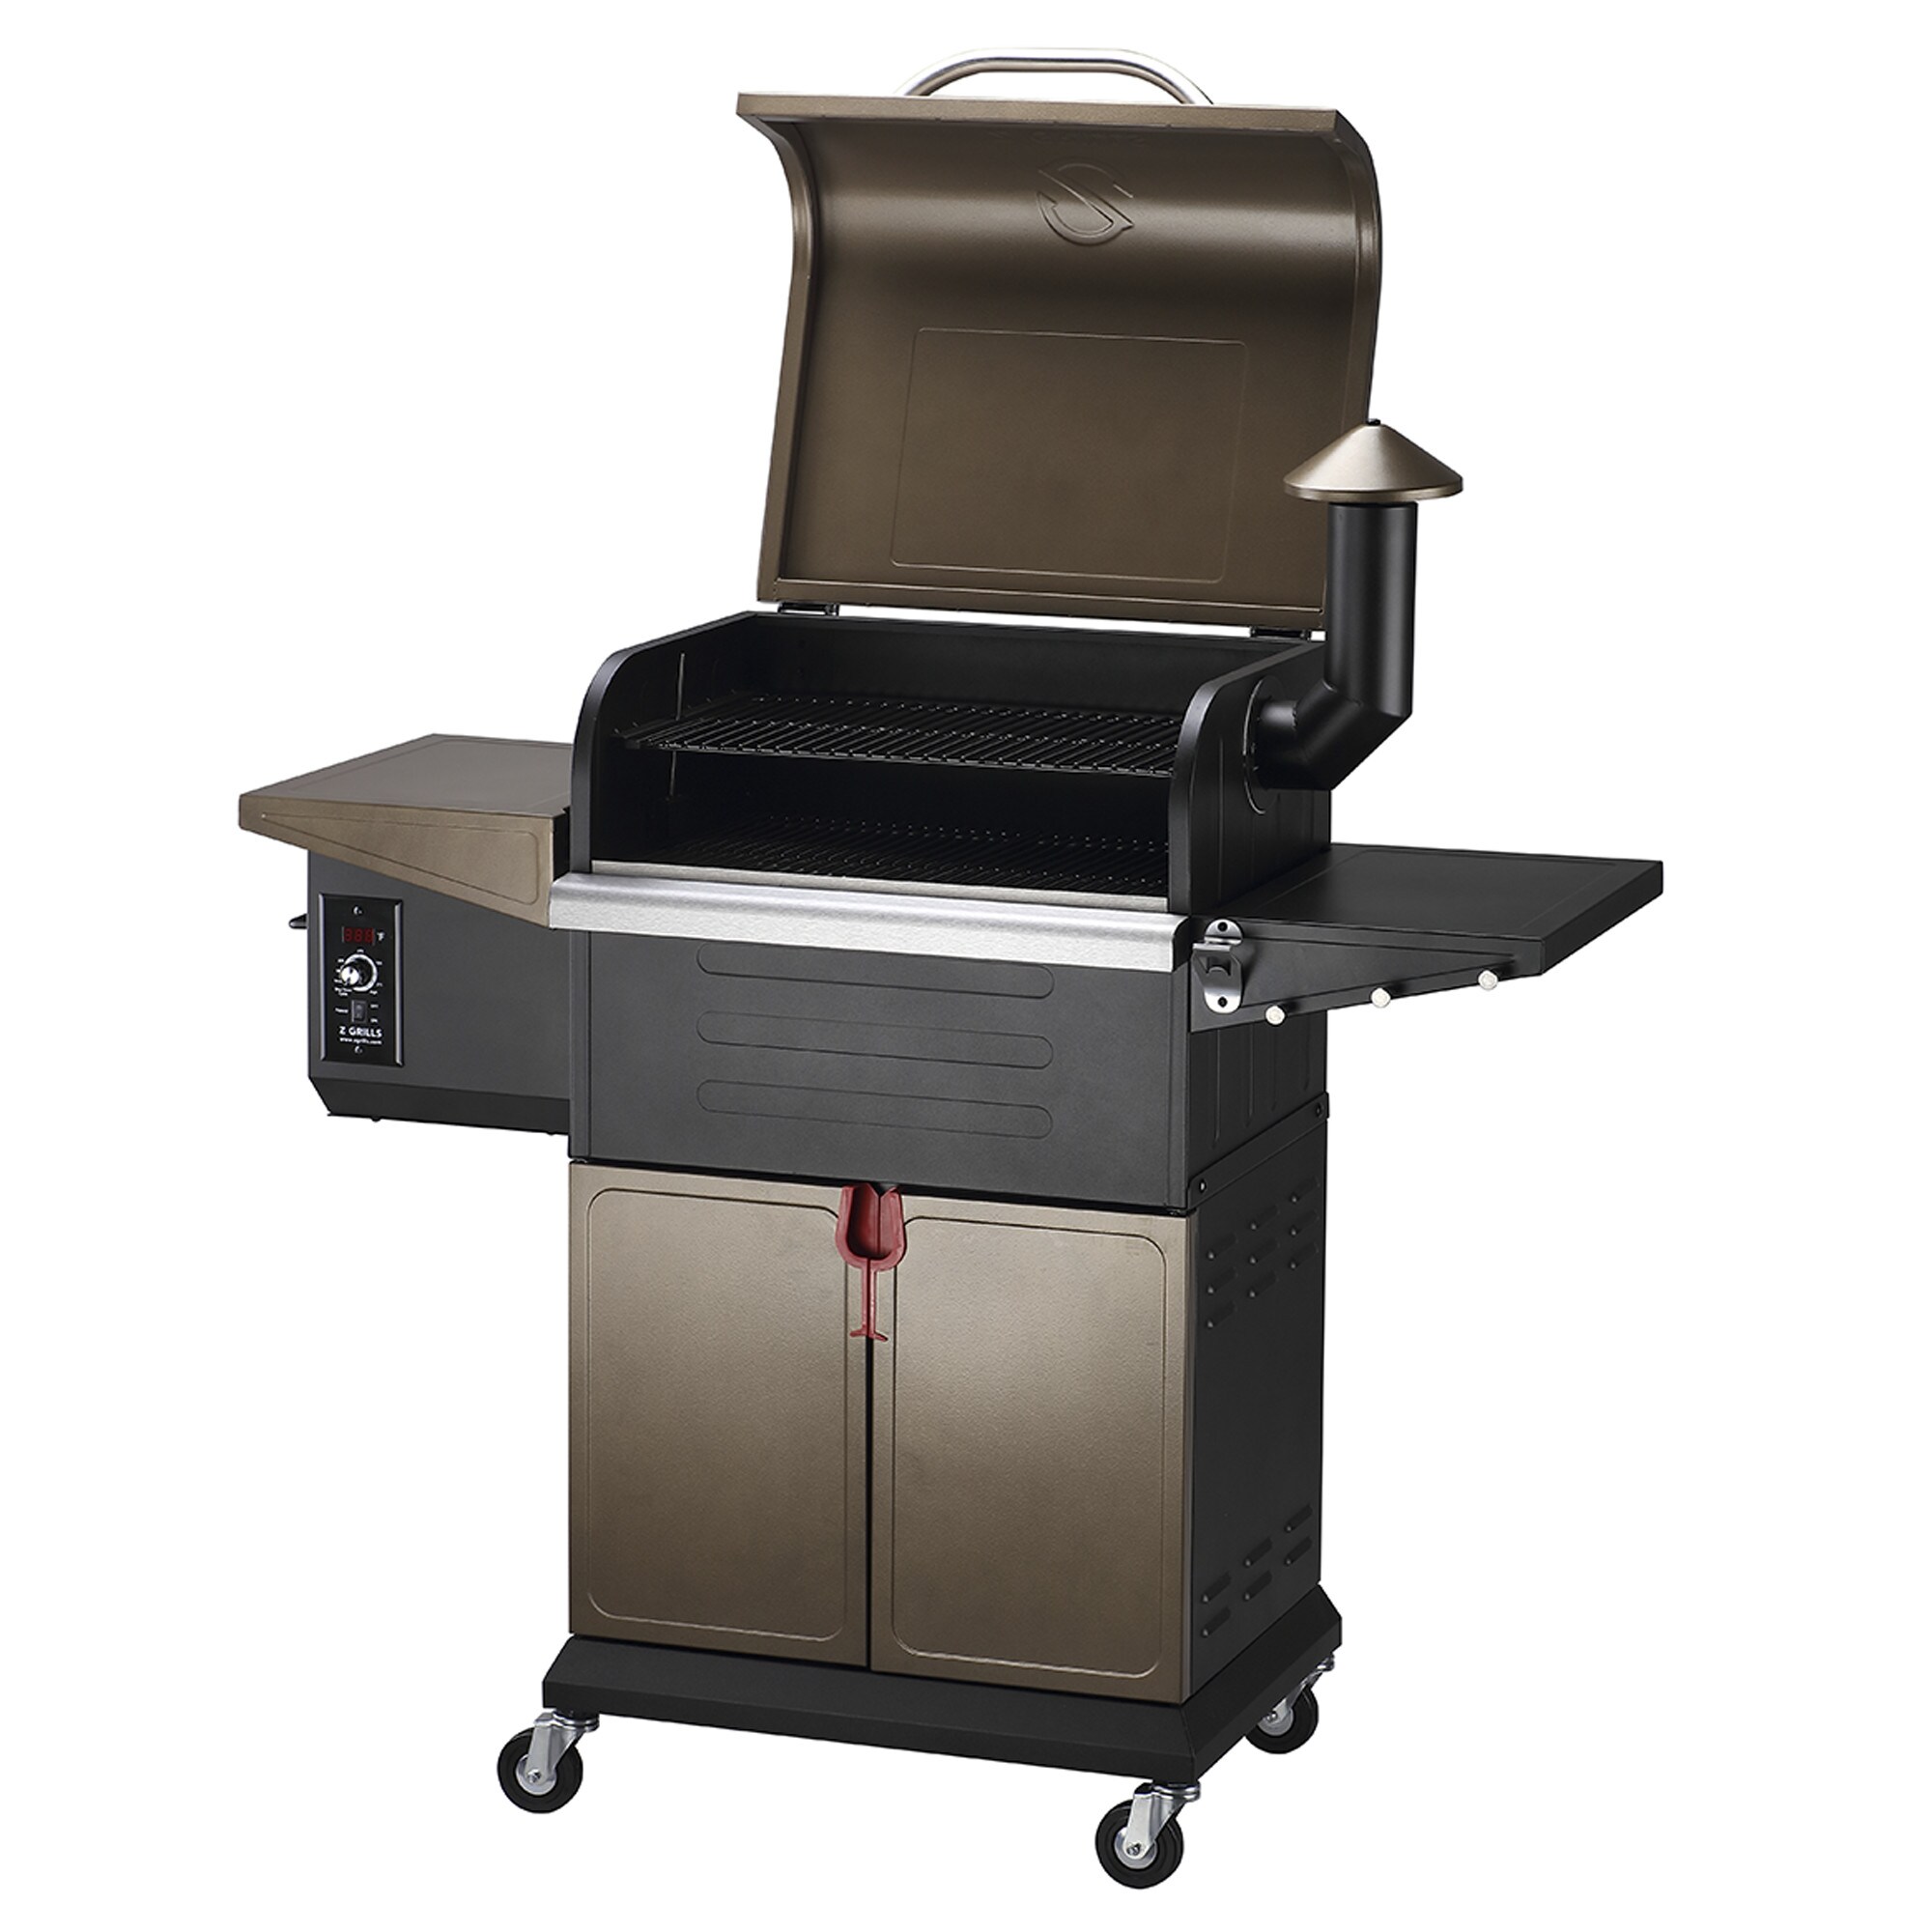 Sunstone 40” Electric Pellet Grill w/ Cold Smoker